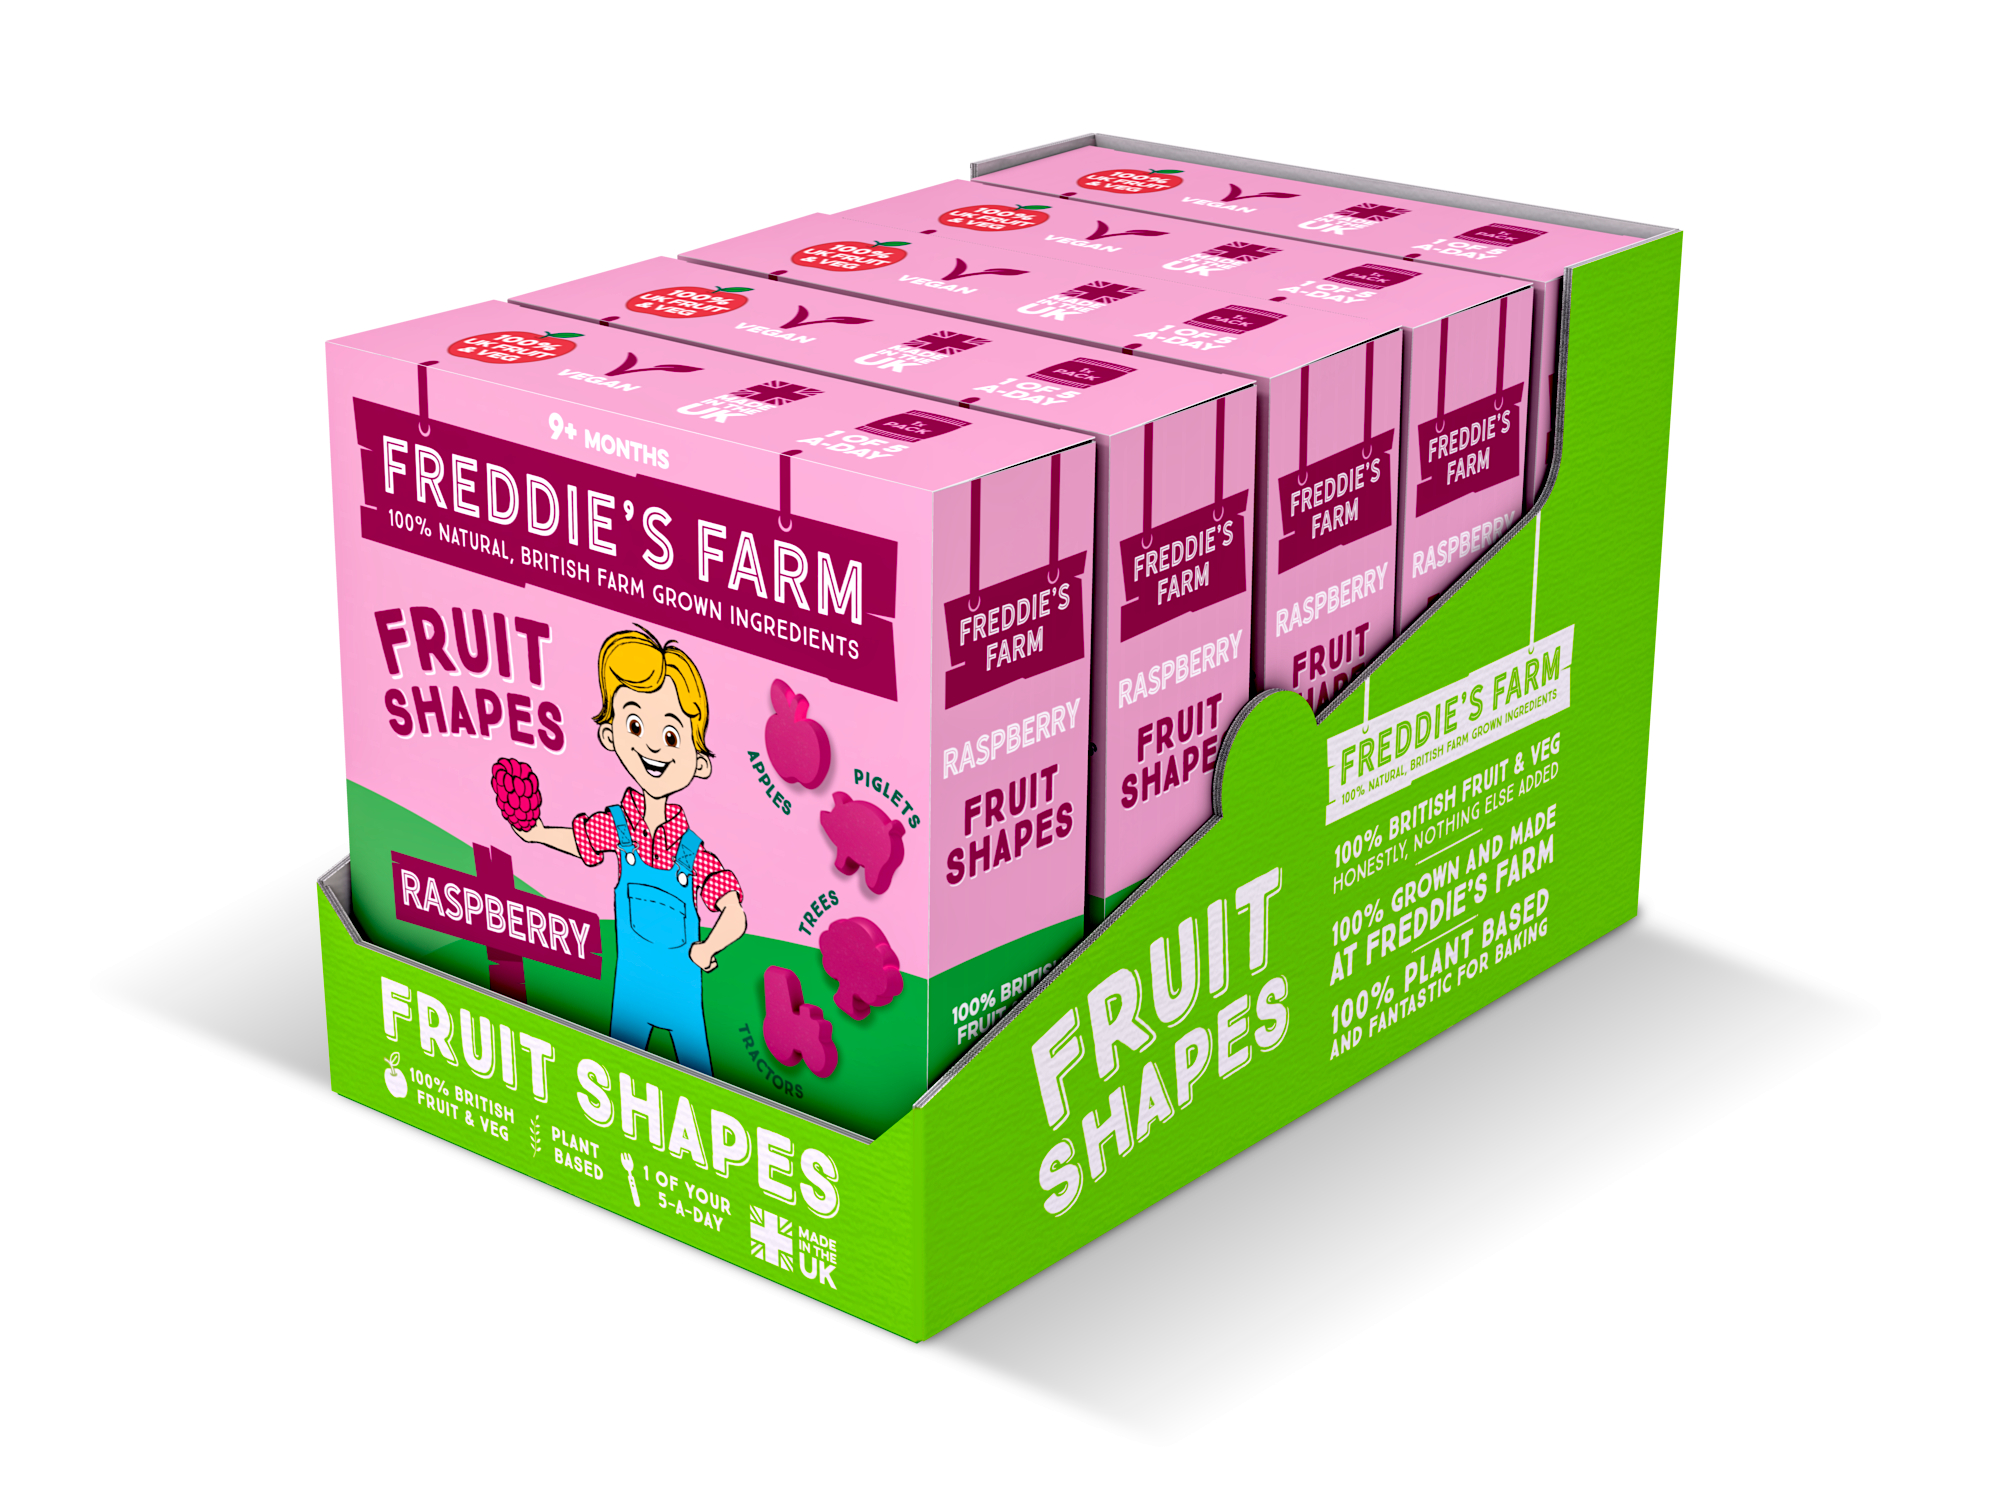 Freddie's Farm Fruit Shapes - Raspberry - Multipack SRP (5 x 5 x 20g plastic free packets) - NEW